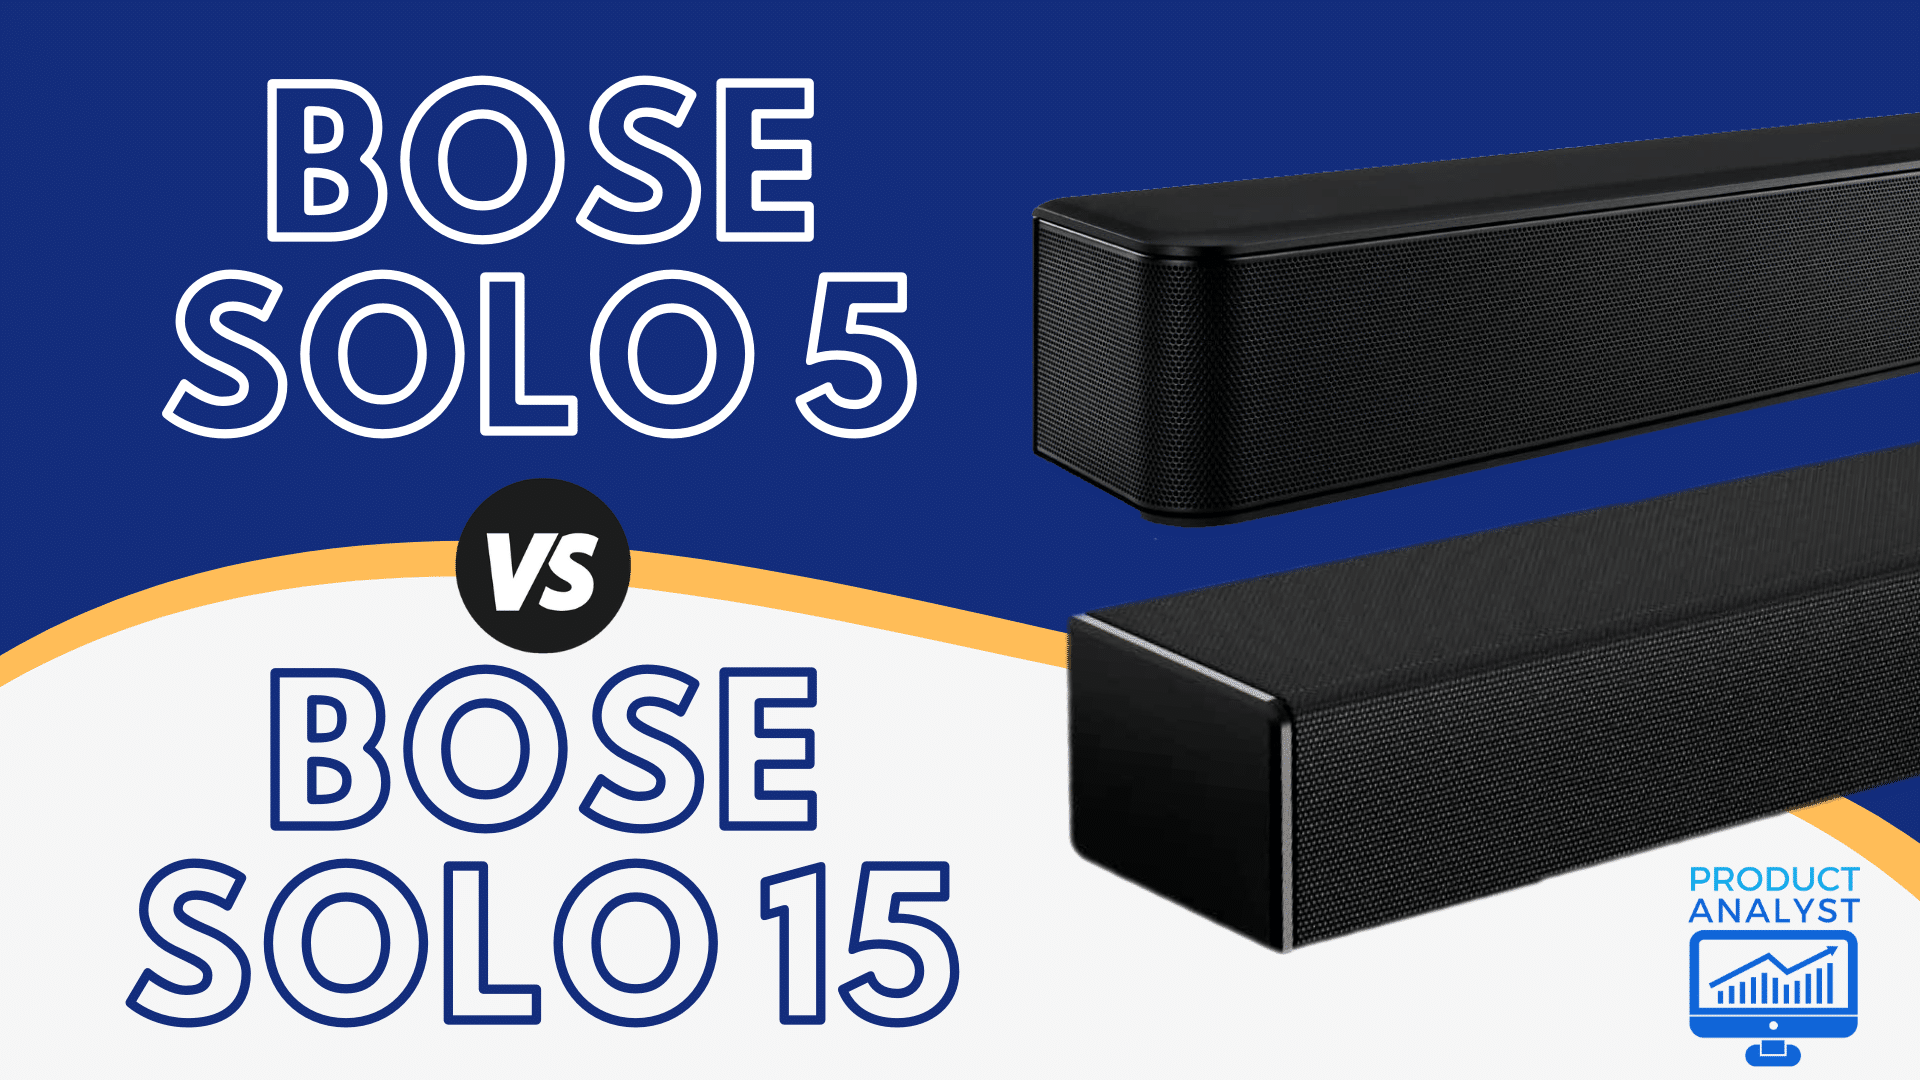 Bose Solo 5 VS 15: Why Do The Matter When Choosing?